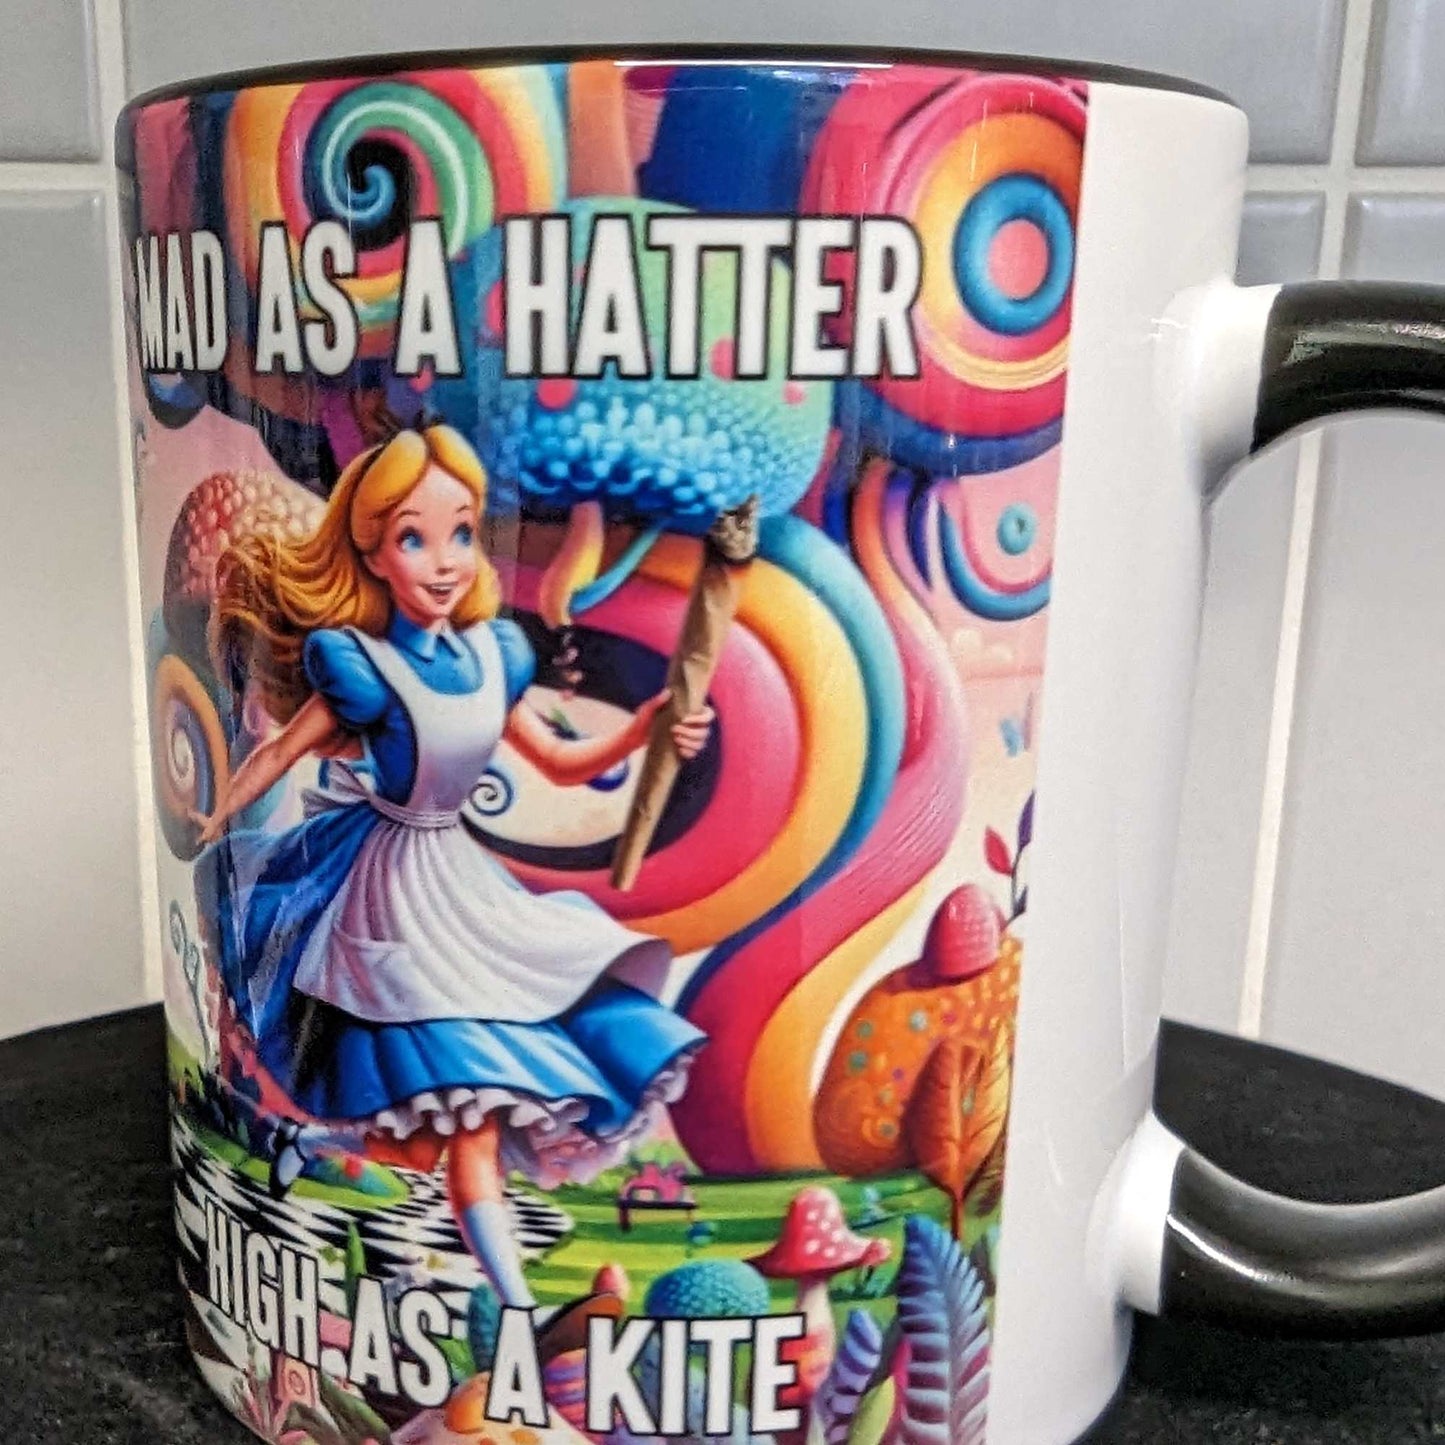 Personalised Mad as a Hatter, High as a Kite Mug - Stoner Novelty Gift, Funny Cannabis Mug, Alice in Wonderland Gift for Him or Her